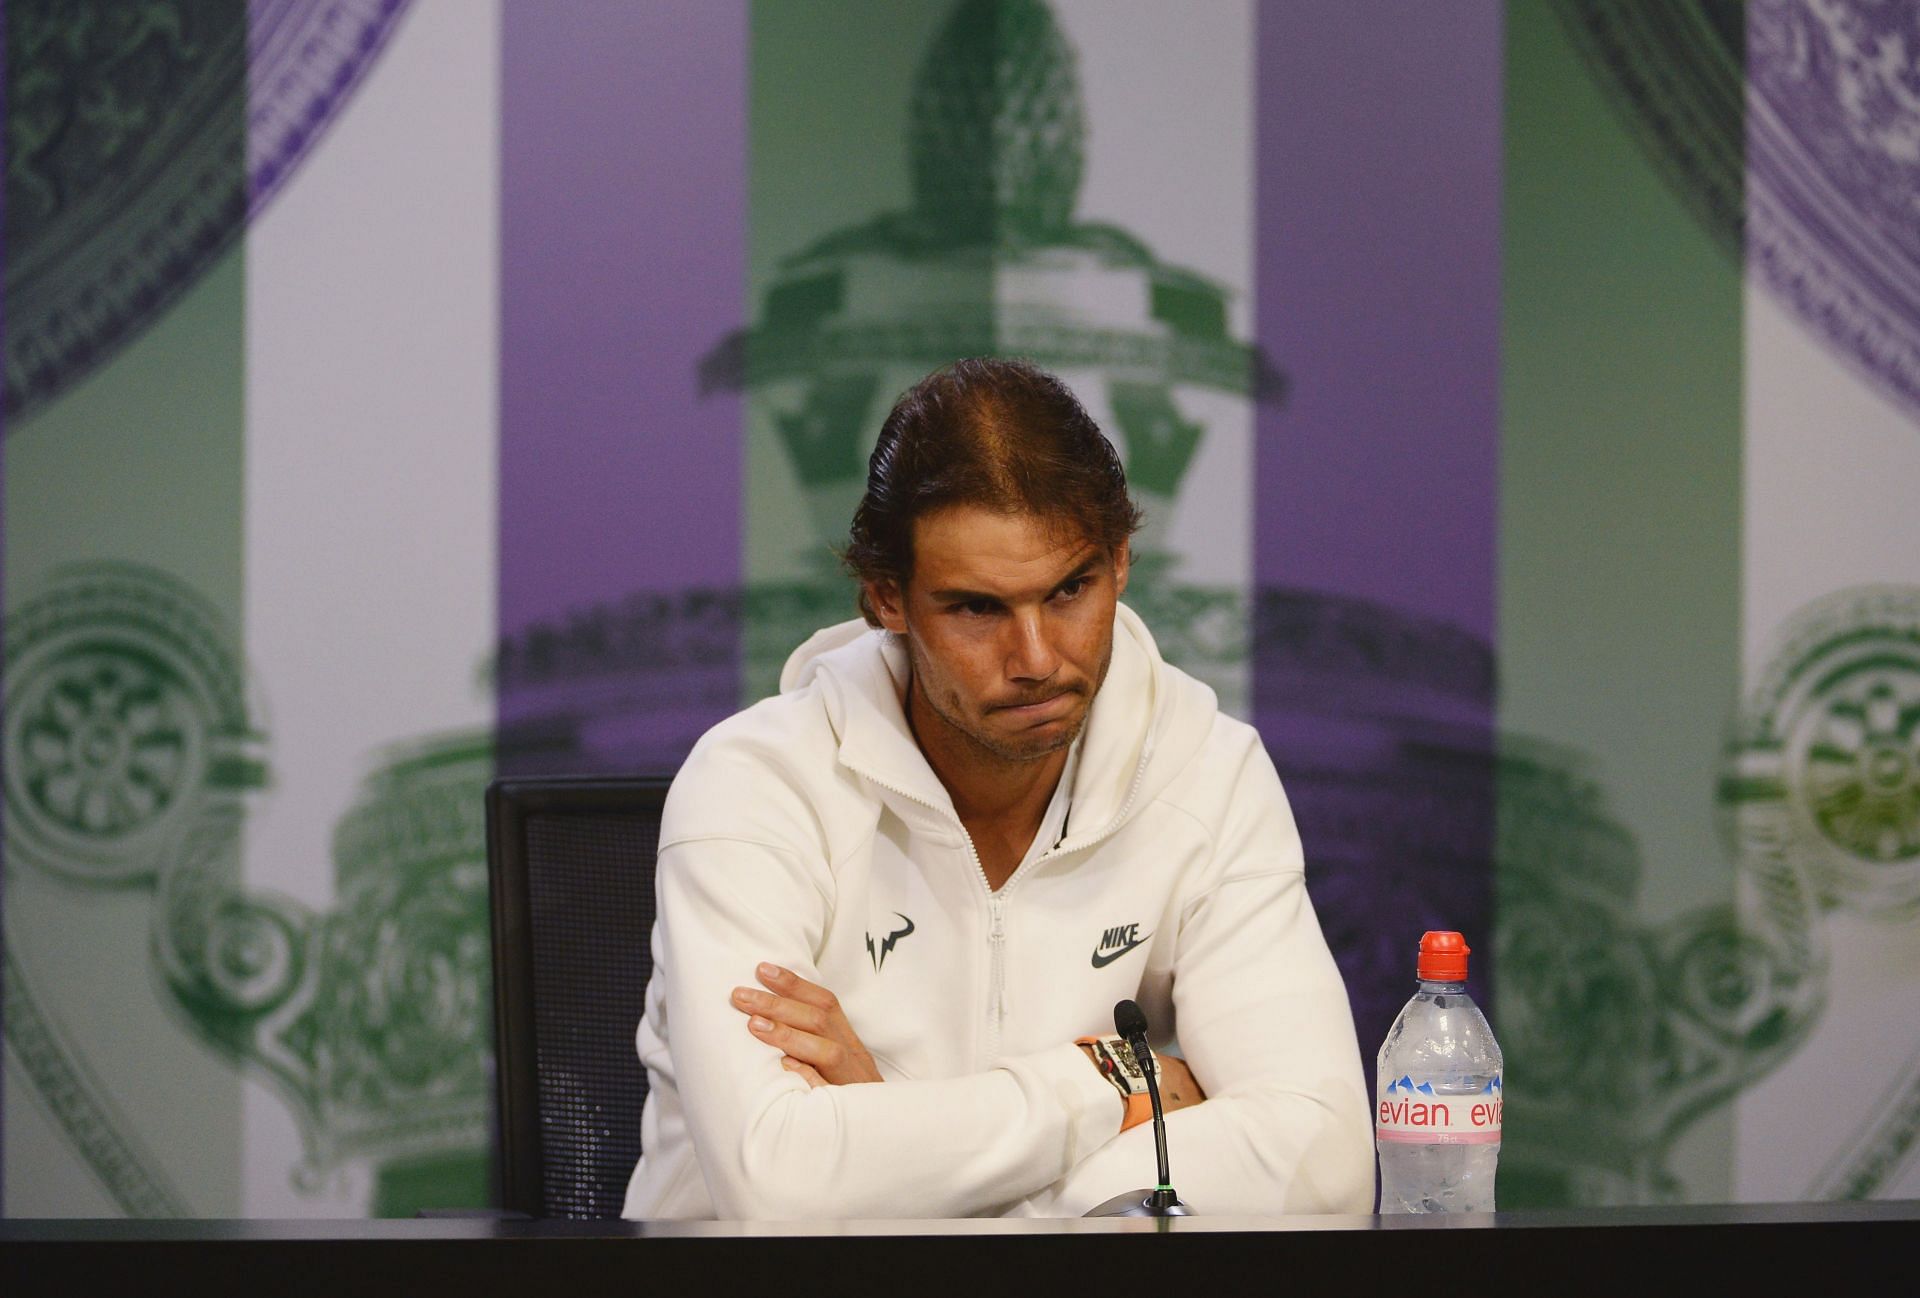 Rafael Nadal revealed that he has been staying at home to keep himself safe from COVID